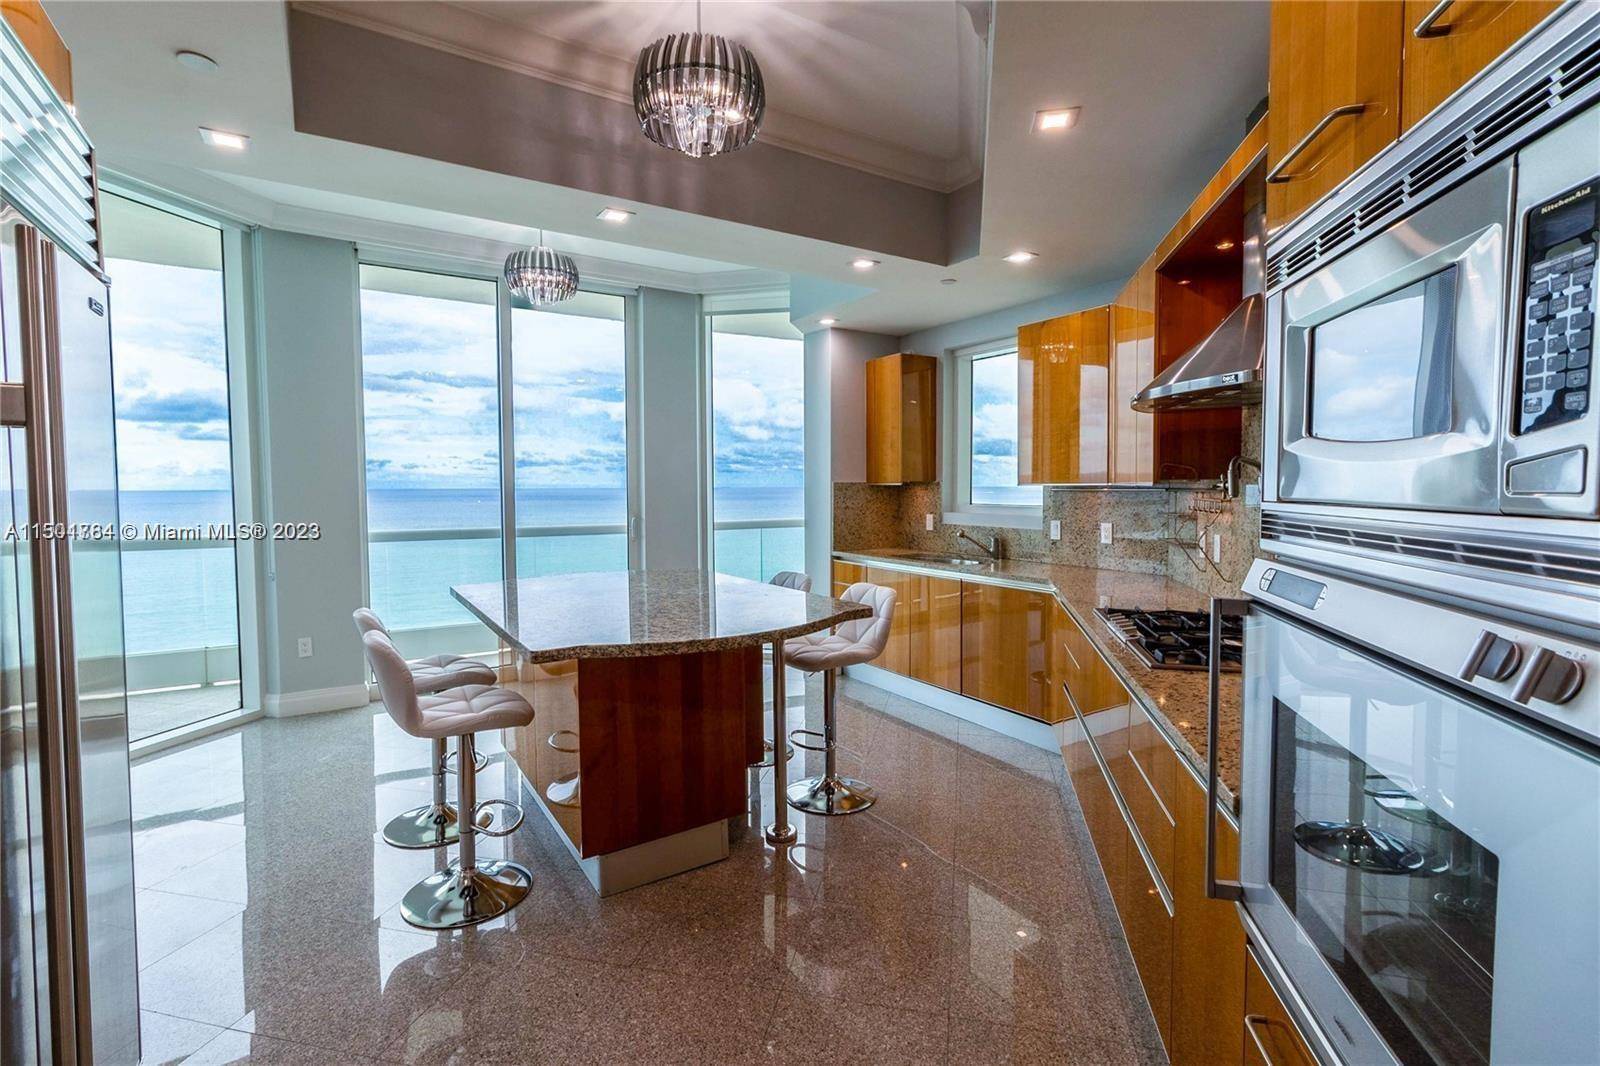 Turnberry Ocean Colony, one of the most desirable and luxurious buildings in Sunny Isles Beach.